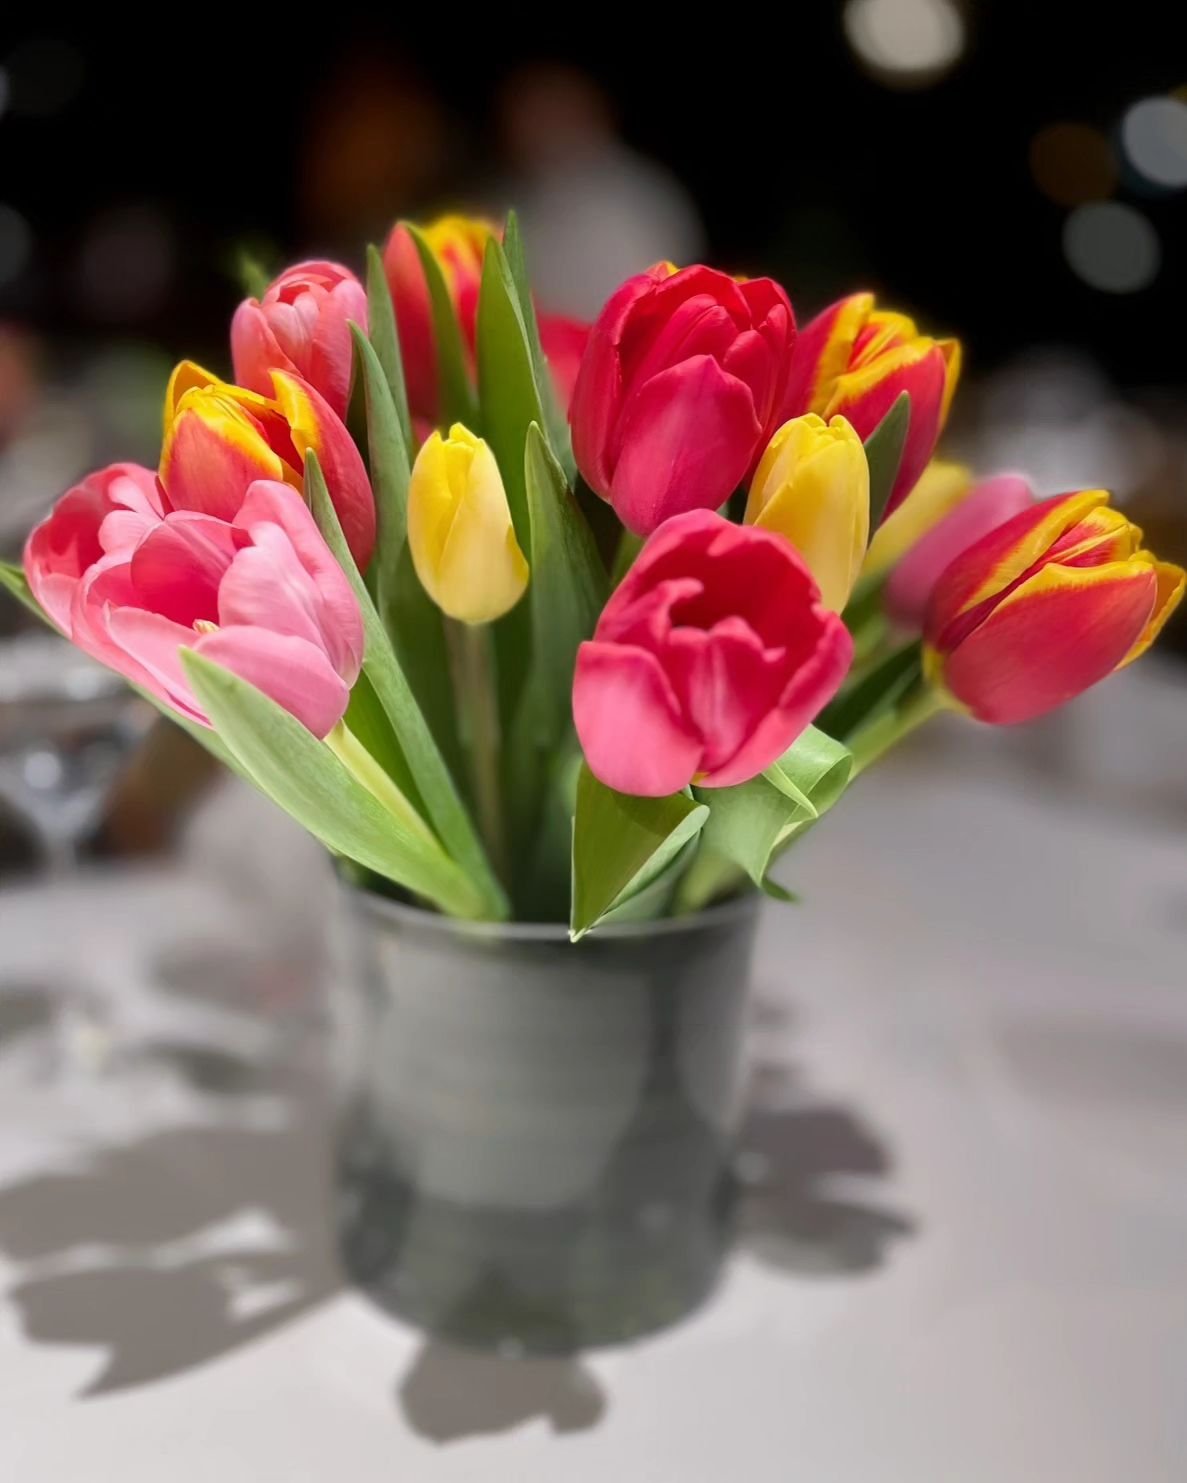 Tulips by Brooklyn Flower Shop 🌷 for a private event @therivercafe 💙 

Contact us to learn more